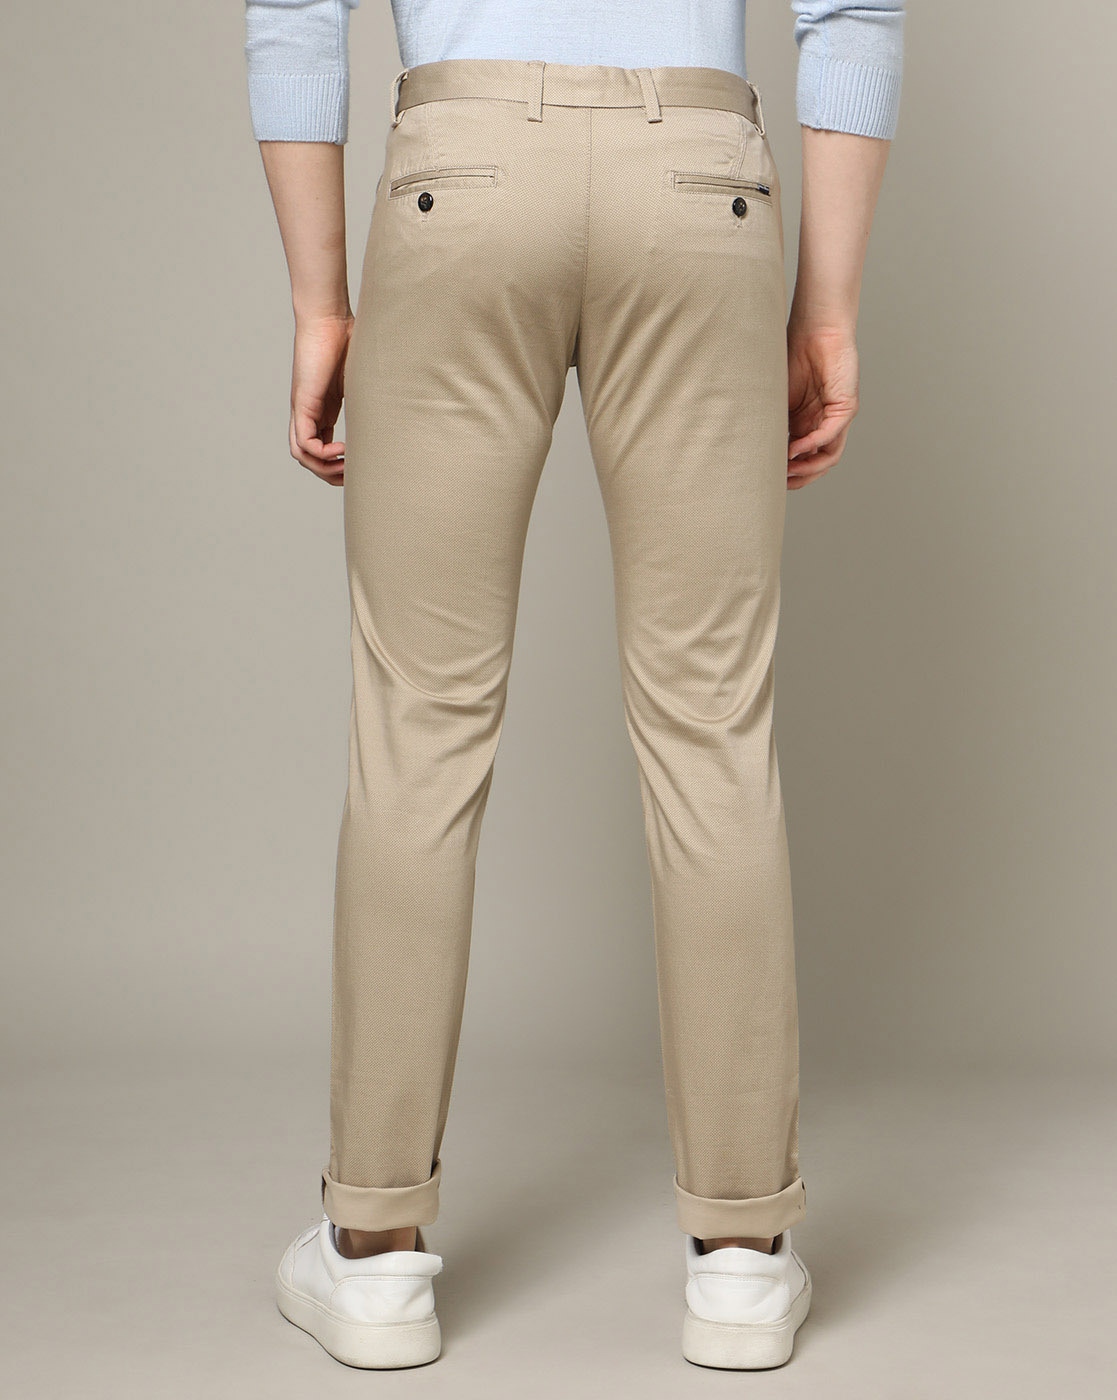 Arrow Trousers - Buy Arrow Trousers Online in India - NNNOW